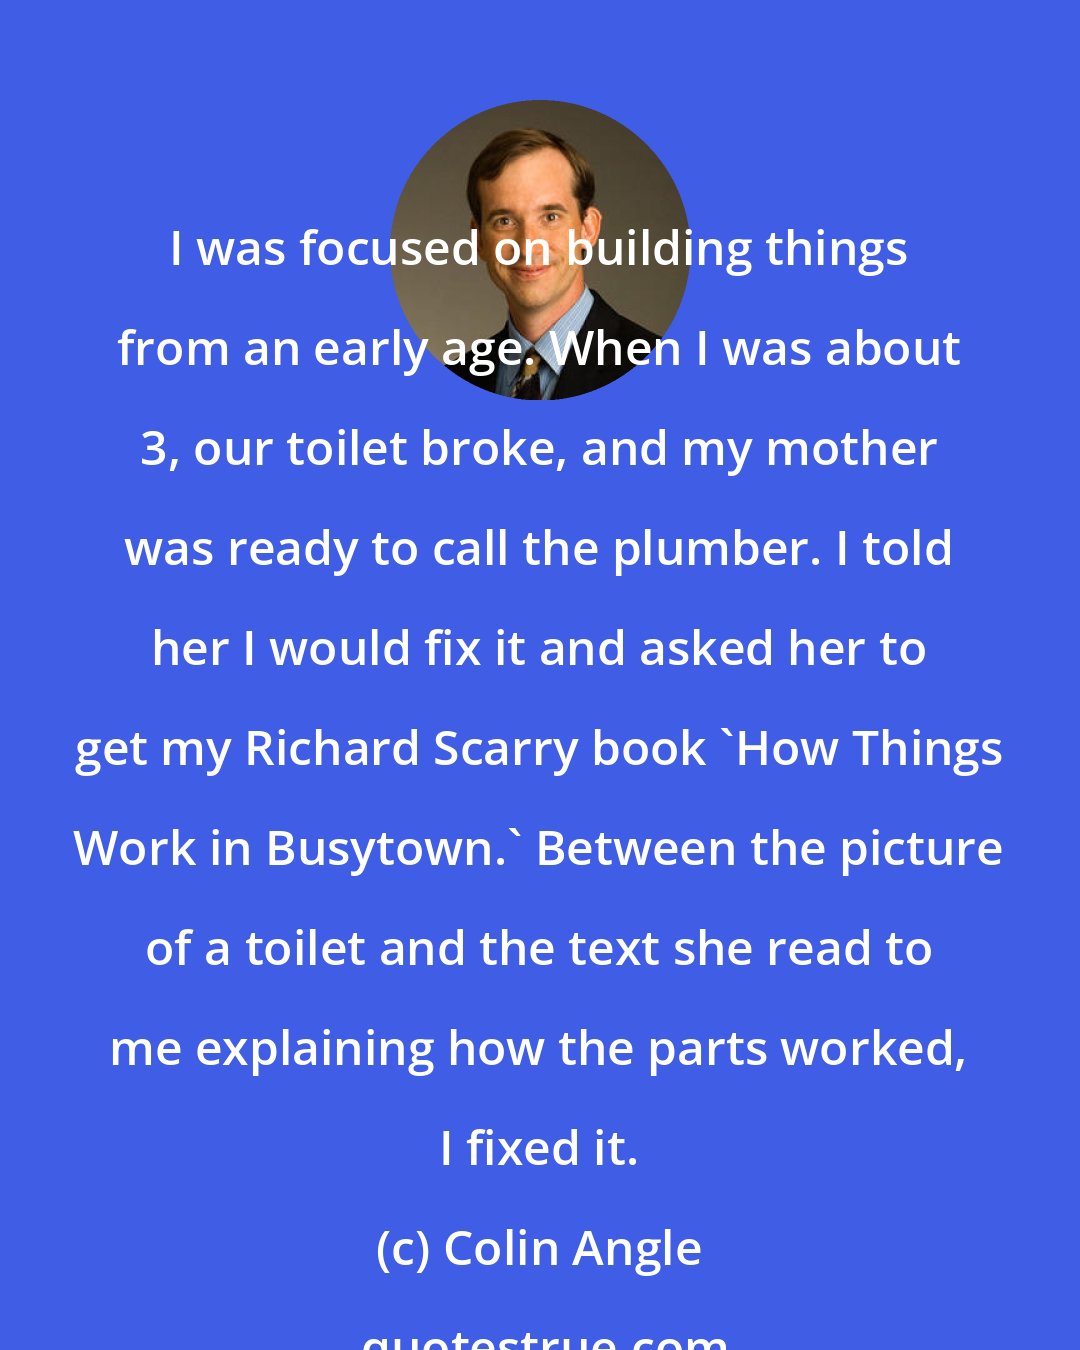 Colin Angle: I was focused on building things from an early age. When I was about 3, our toilet broke, and my mother was ready to call the plumber. I told her I would fix it and asked her to get my Richard Scarry book 'How Things Work in Busytown.' Between the picture of a toilet and the text she read to me explaining how the parts worked, I fixed it.